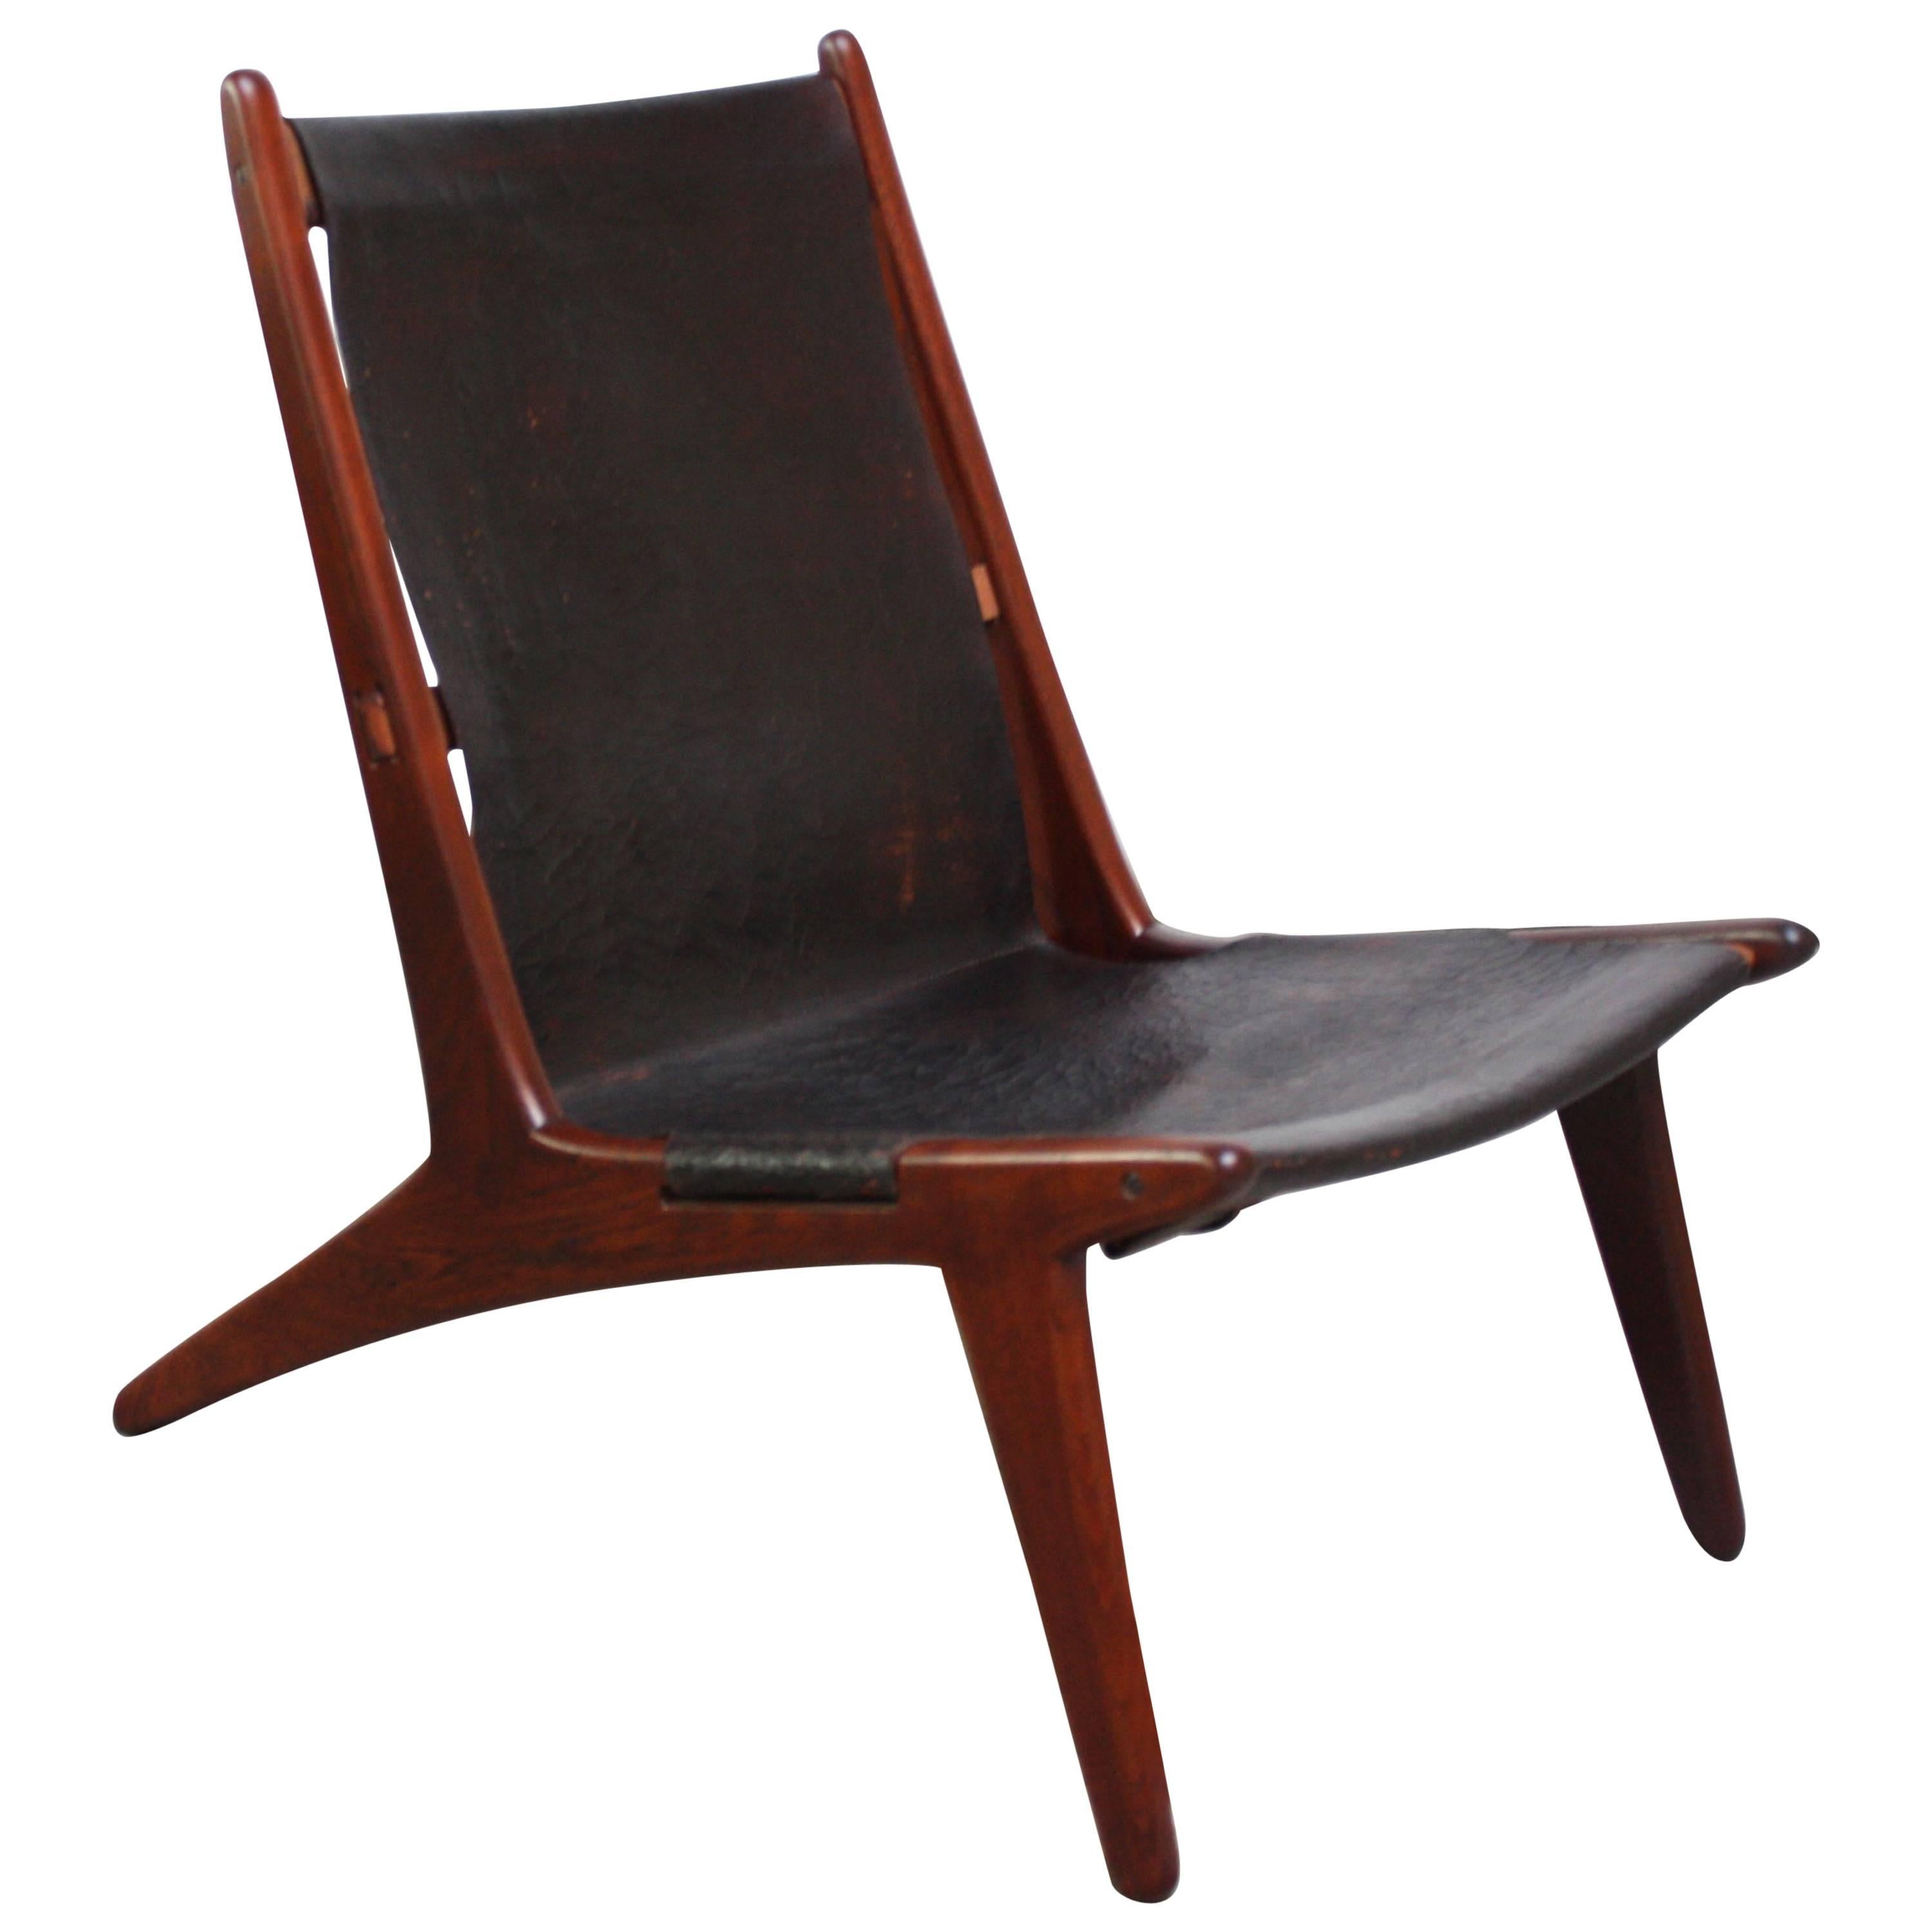 Swedish Teak and Leather Hunting Chair Model #204 by Uno and Östen Kristiansson